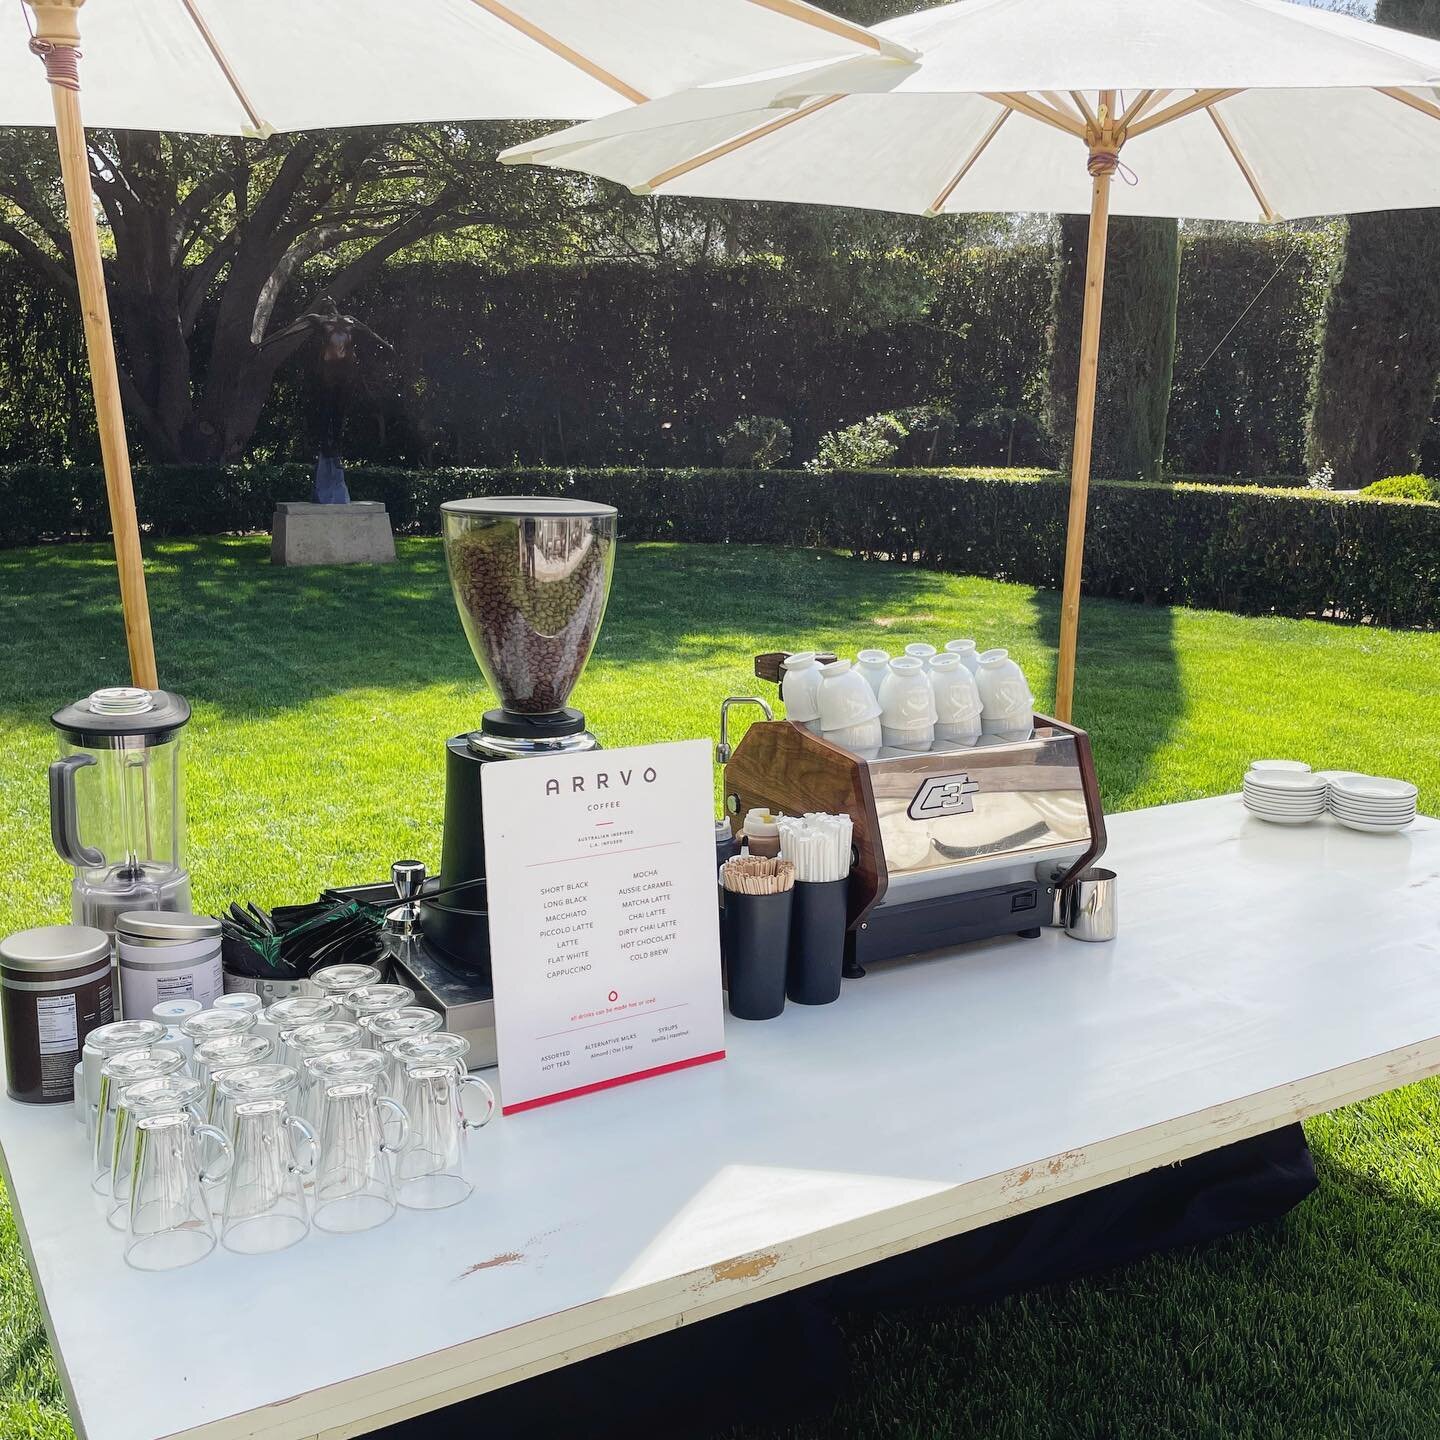 Happy Easter from the Arrvo fam! 🐰🌷 Enjoying the day with @foodjoycateringevents for this lovely brunch gathering! ☺️
.
.
.
.
#arrvo #coffee #losangeles #california #smallbusiness #catering #mobilecoffee #coffeecart #espresso #instacoffee #coffeeca